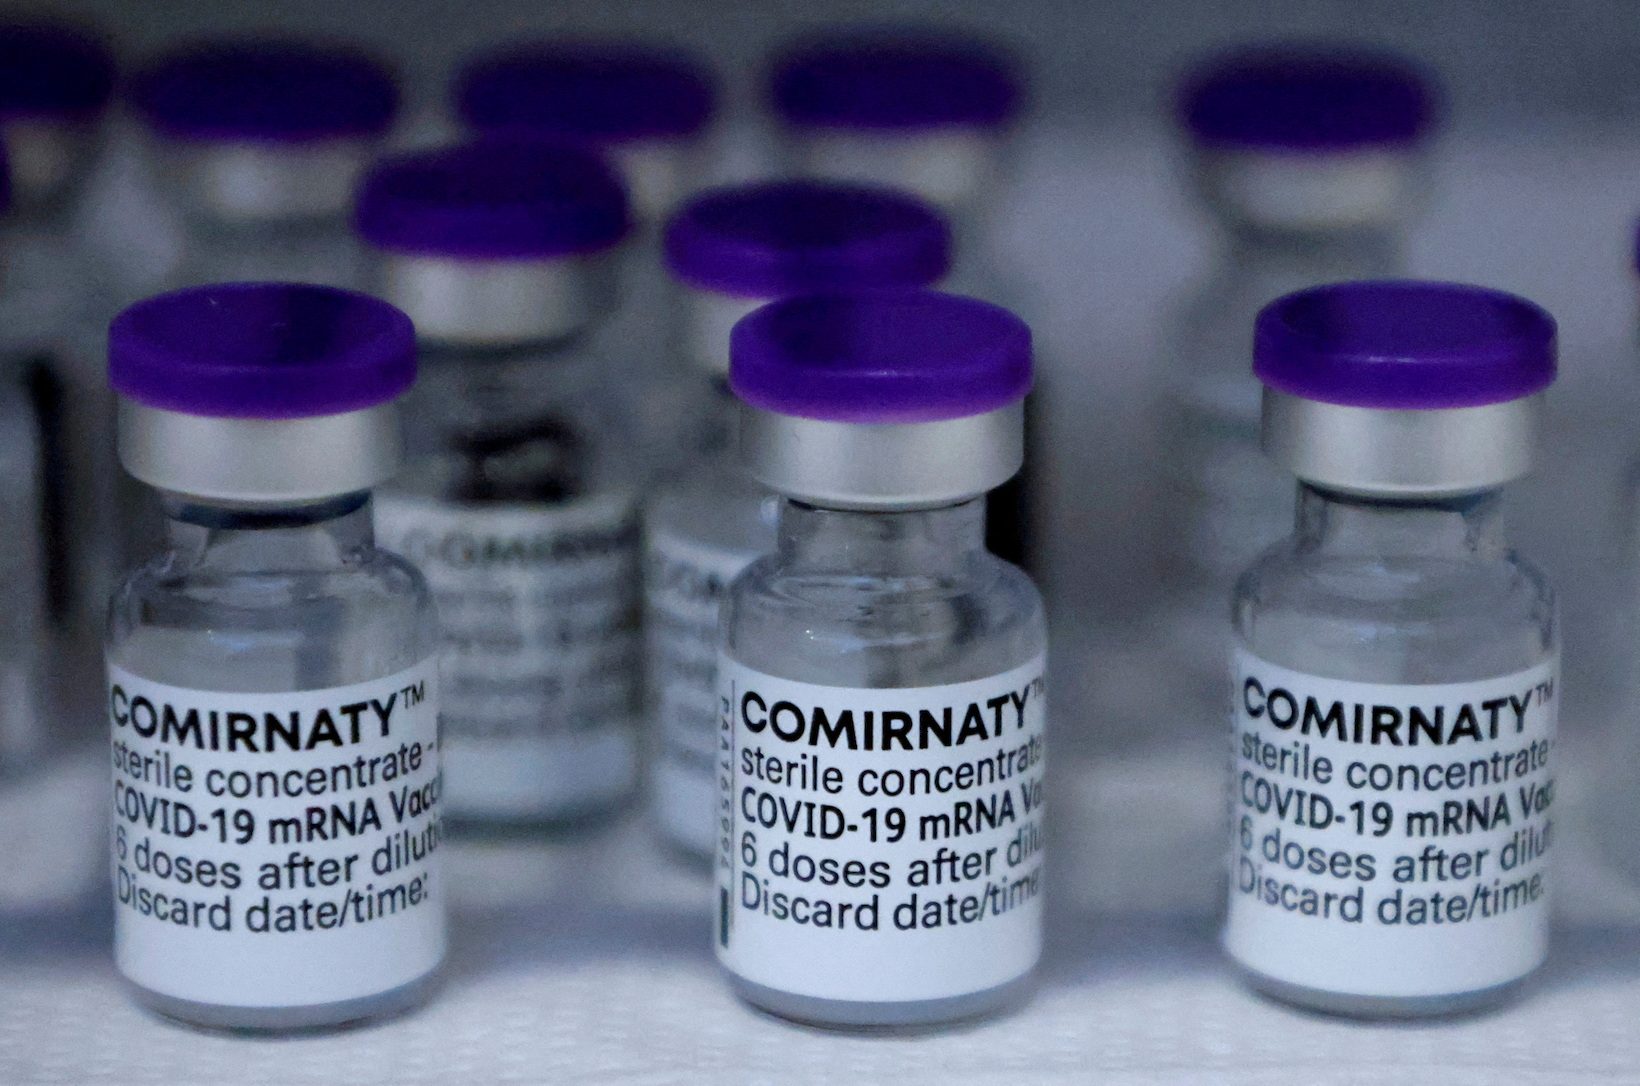 If you’re high risk, do not wait for updated COVID-19 vaccines, experts say